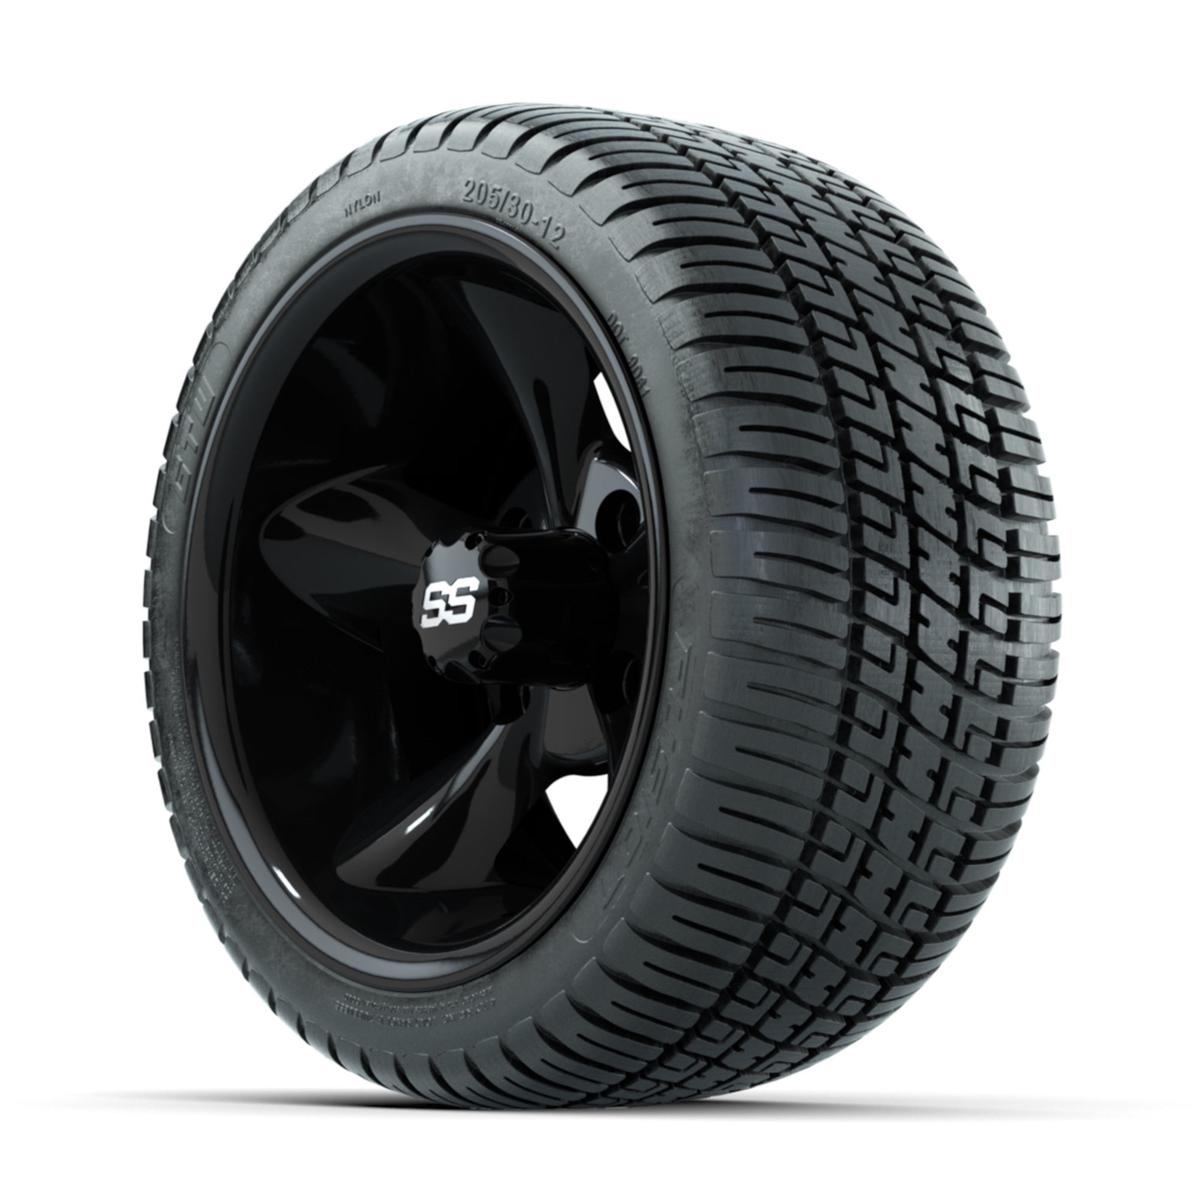 GTW Godfather Black 12 in Wheels with 205/30-12 Fusion Street Tires – Full Set